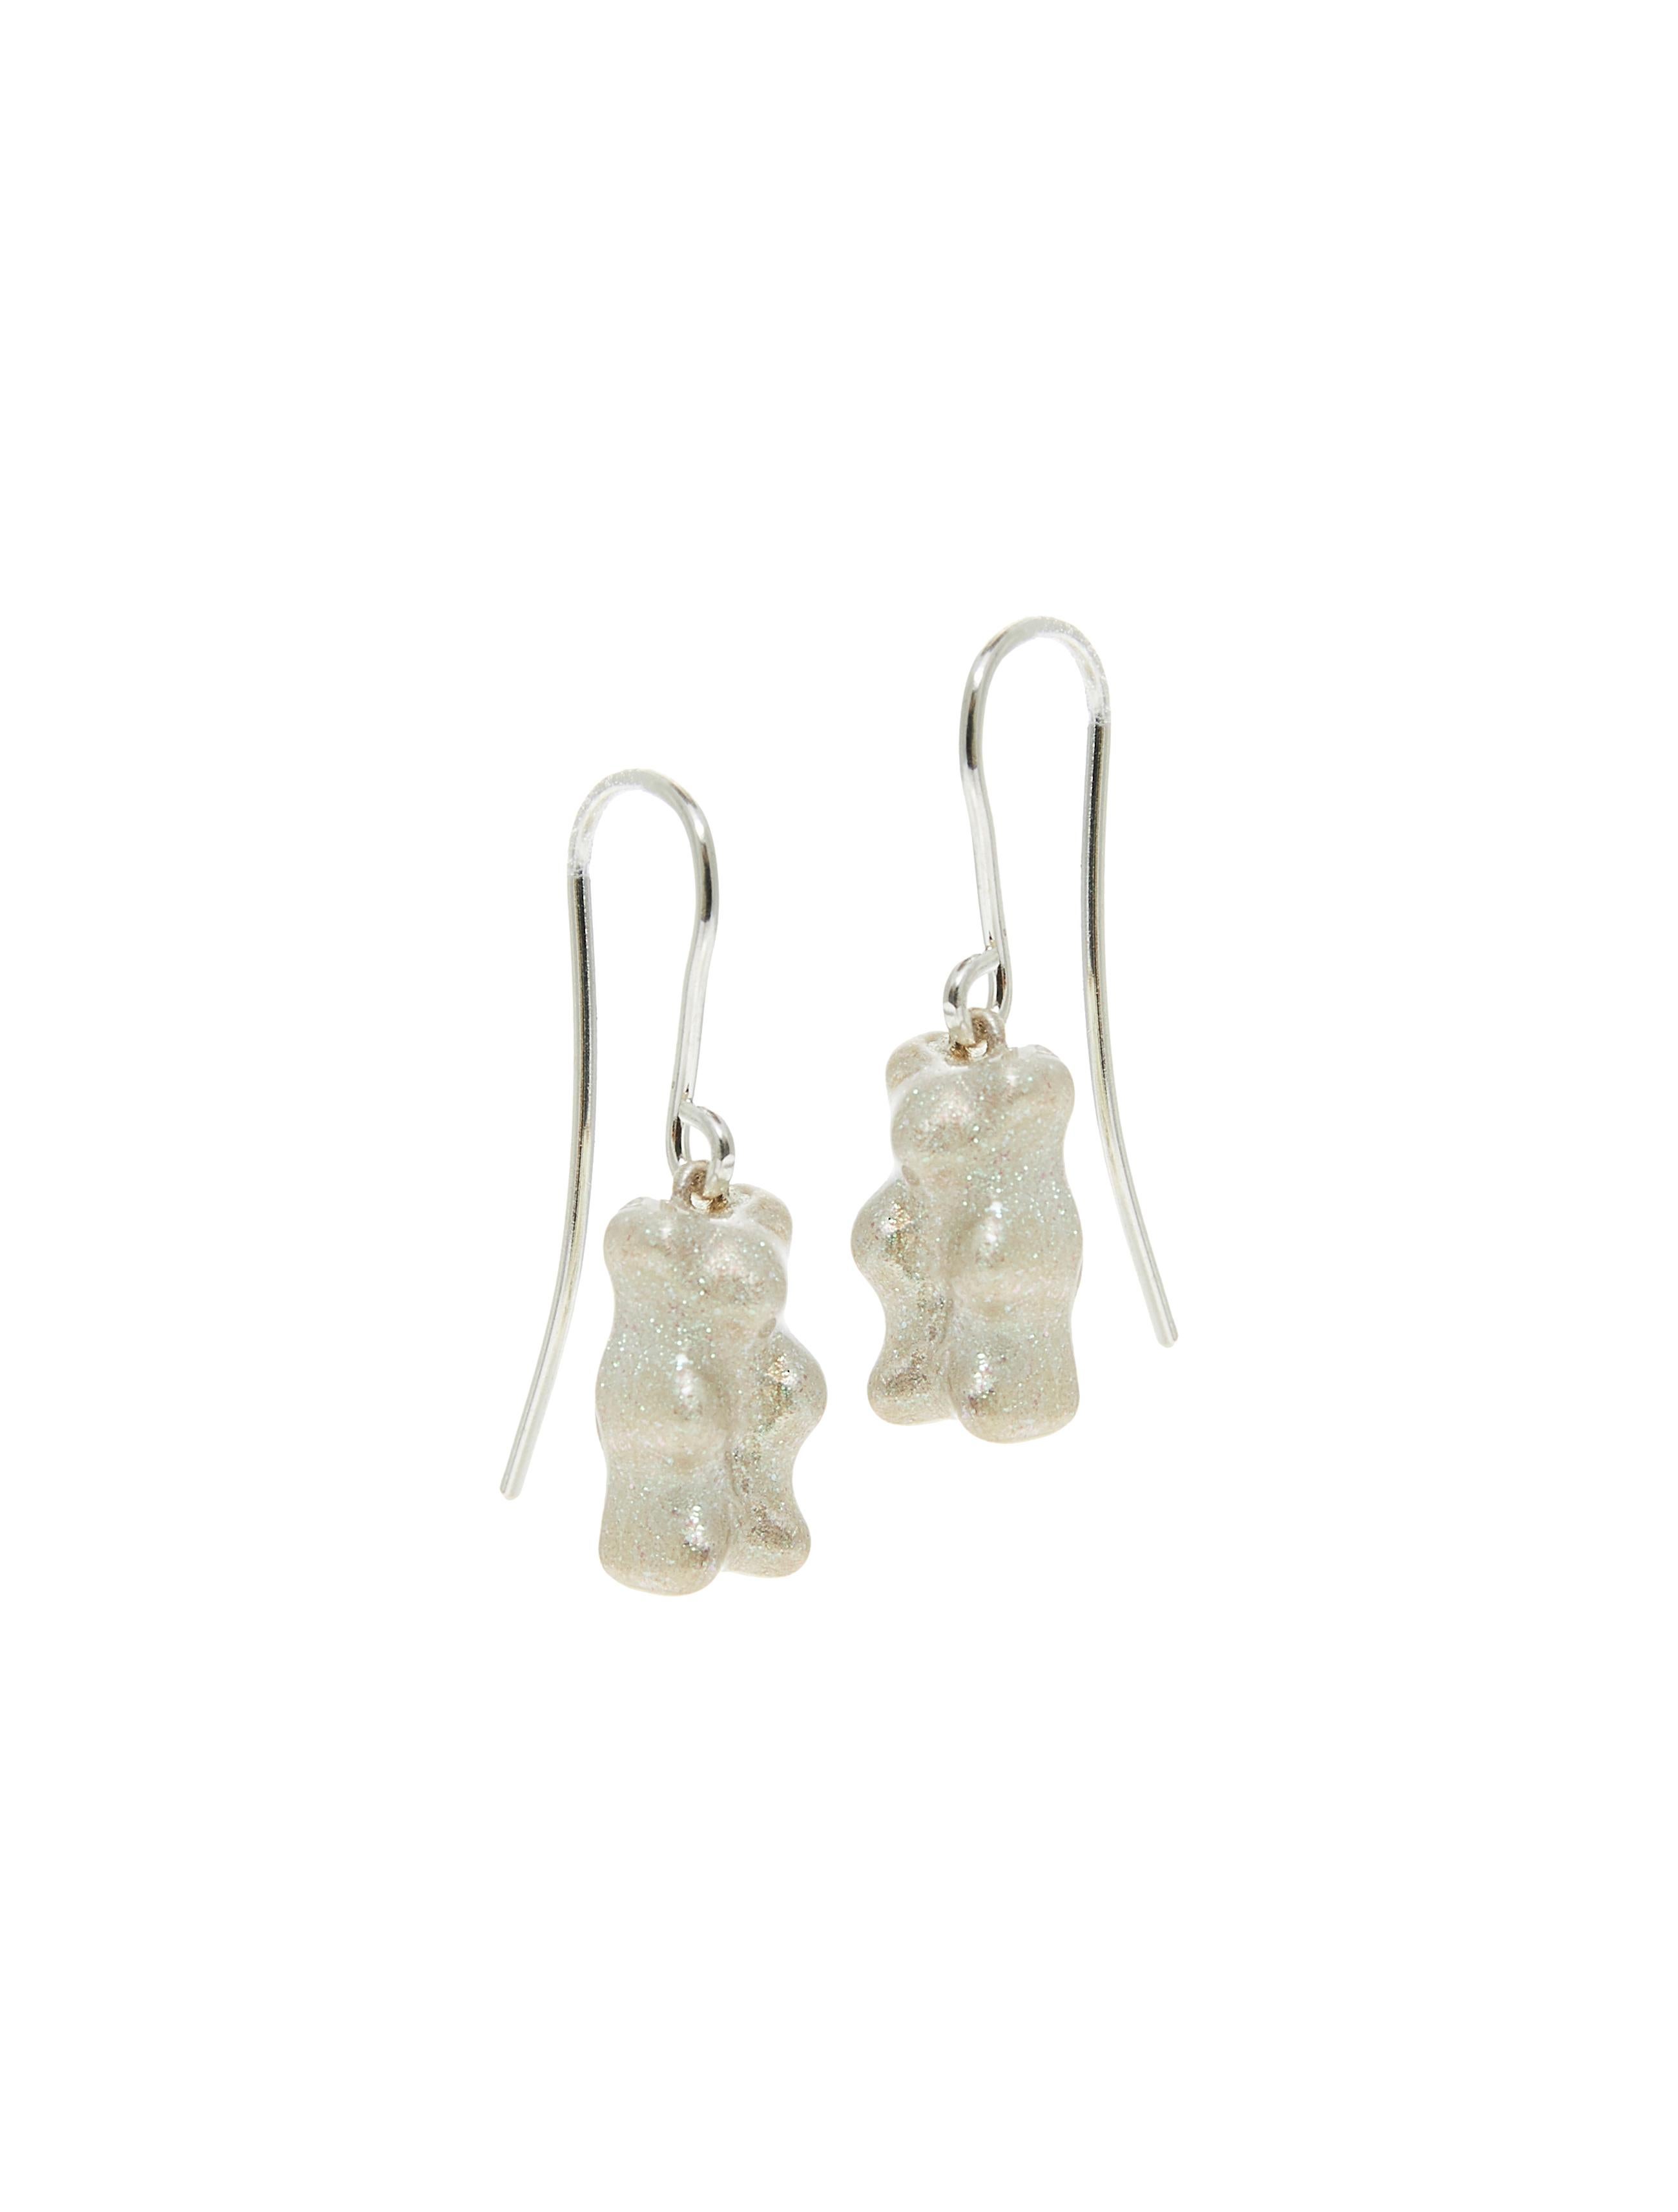 Sterling  silver gummy bear drop earrings with transparent silver with green glitter  enamel coverage. 

The Gummy Project by Maggoosh is a capsule collection inspired by the designer's life in New York City and her passion for breakdancing and